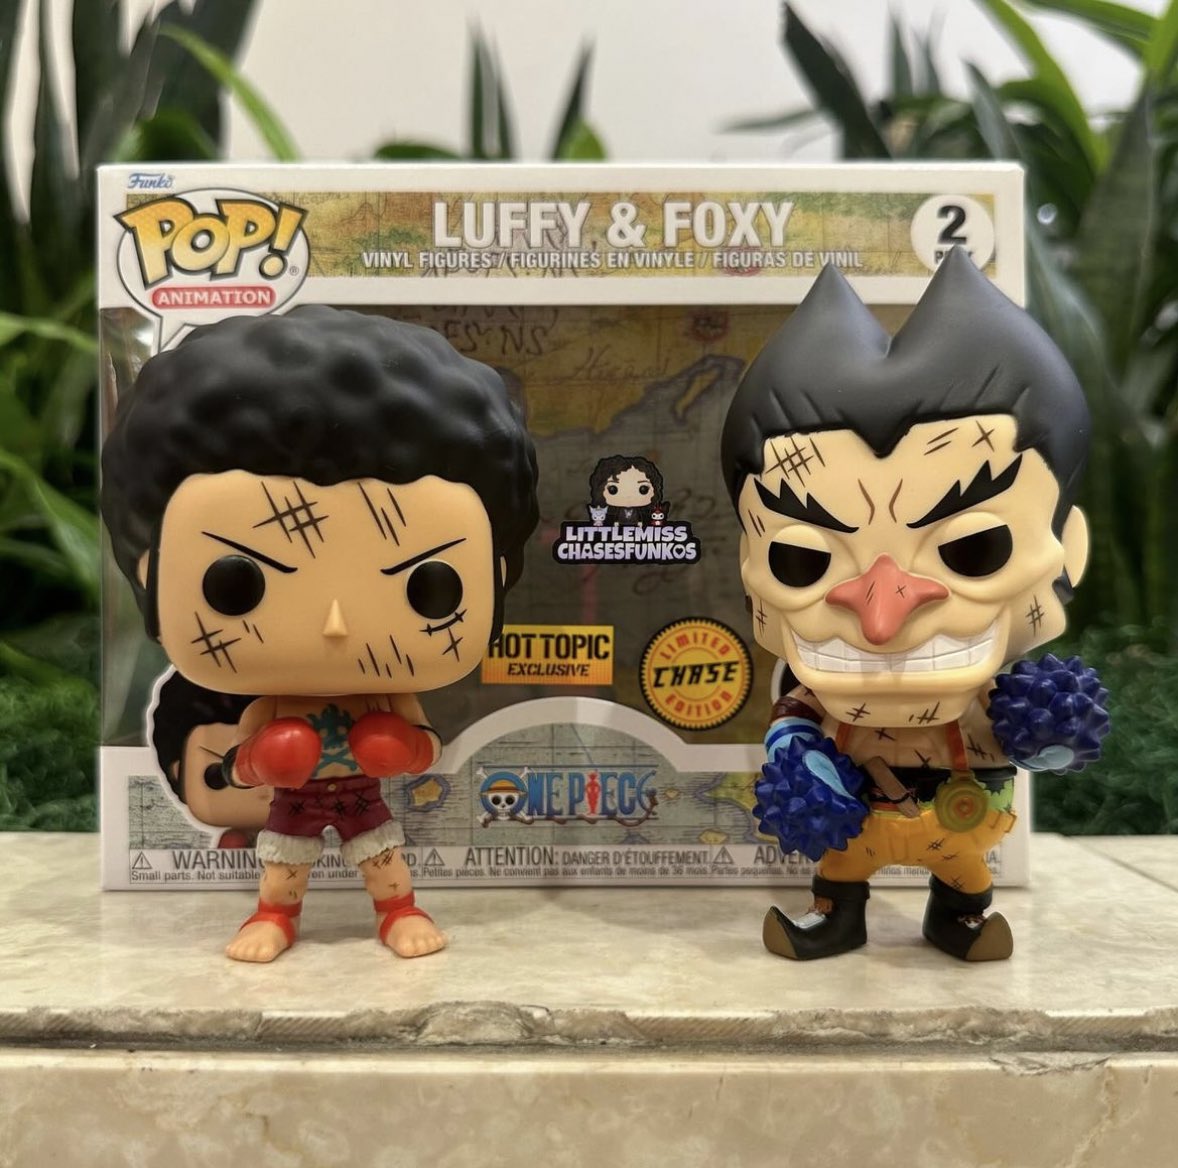 Luffy and Foxy Chase Funko POP! 2 Pack, check them out in person and OOB below! Thanks @evilprincess818 ~ #OnePiece #FPN #FunkoPOPNews #Funko #POP #POPVinyl #FunkoPOP #FunkoSoda